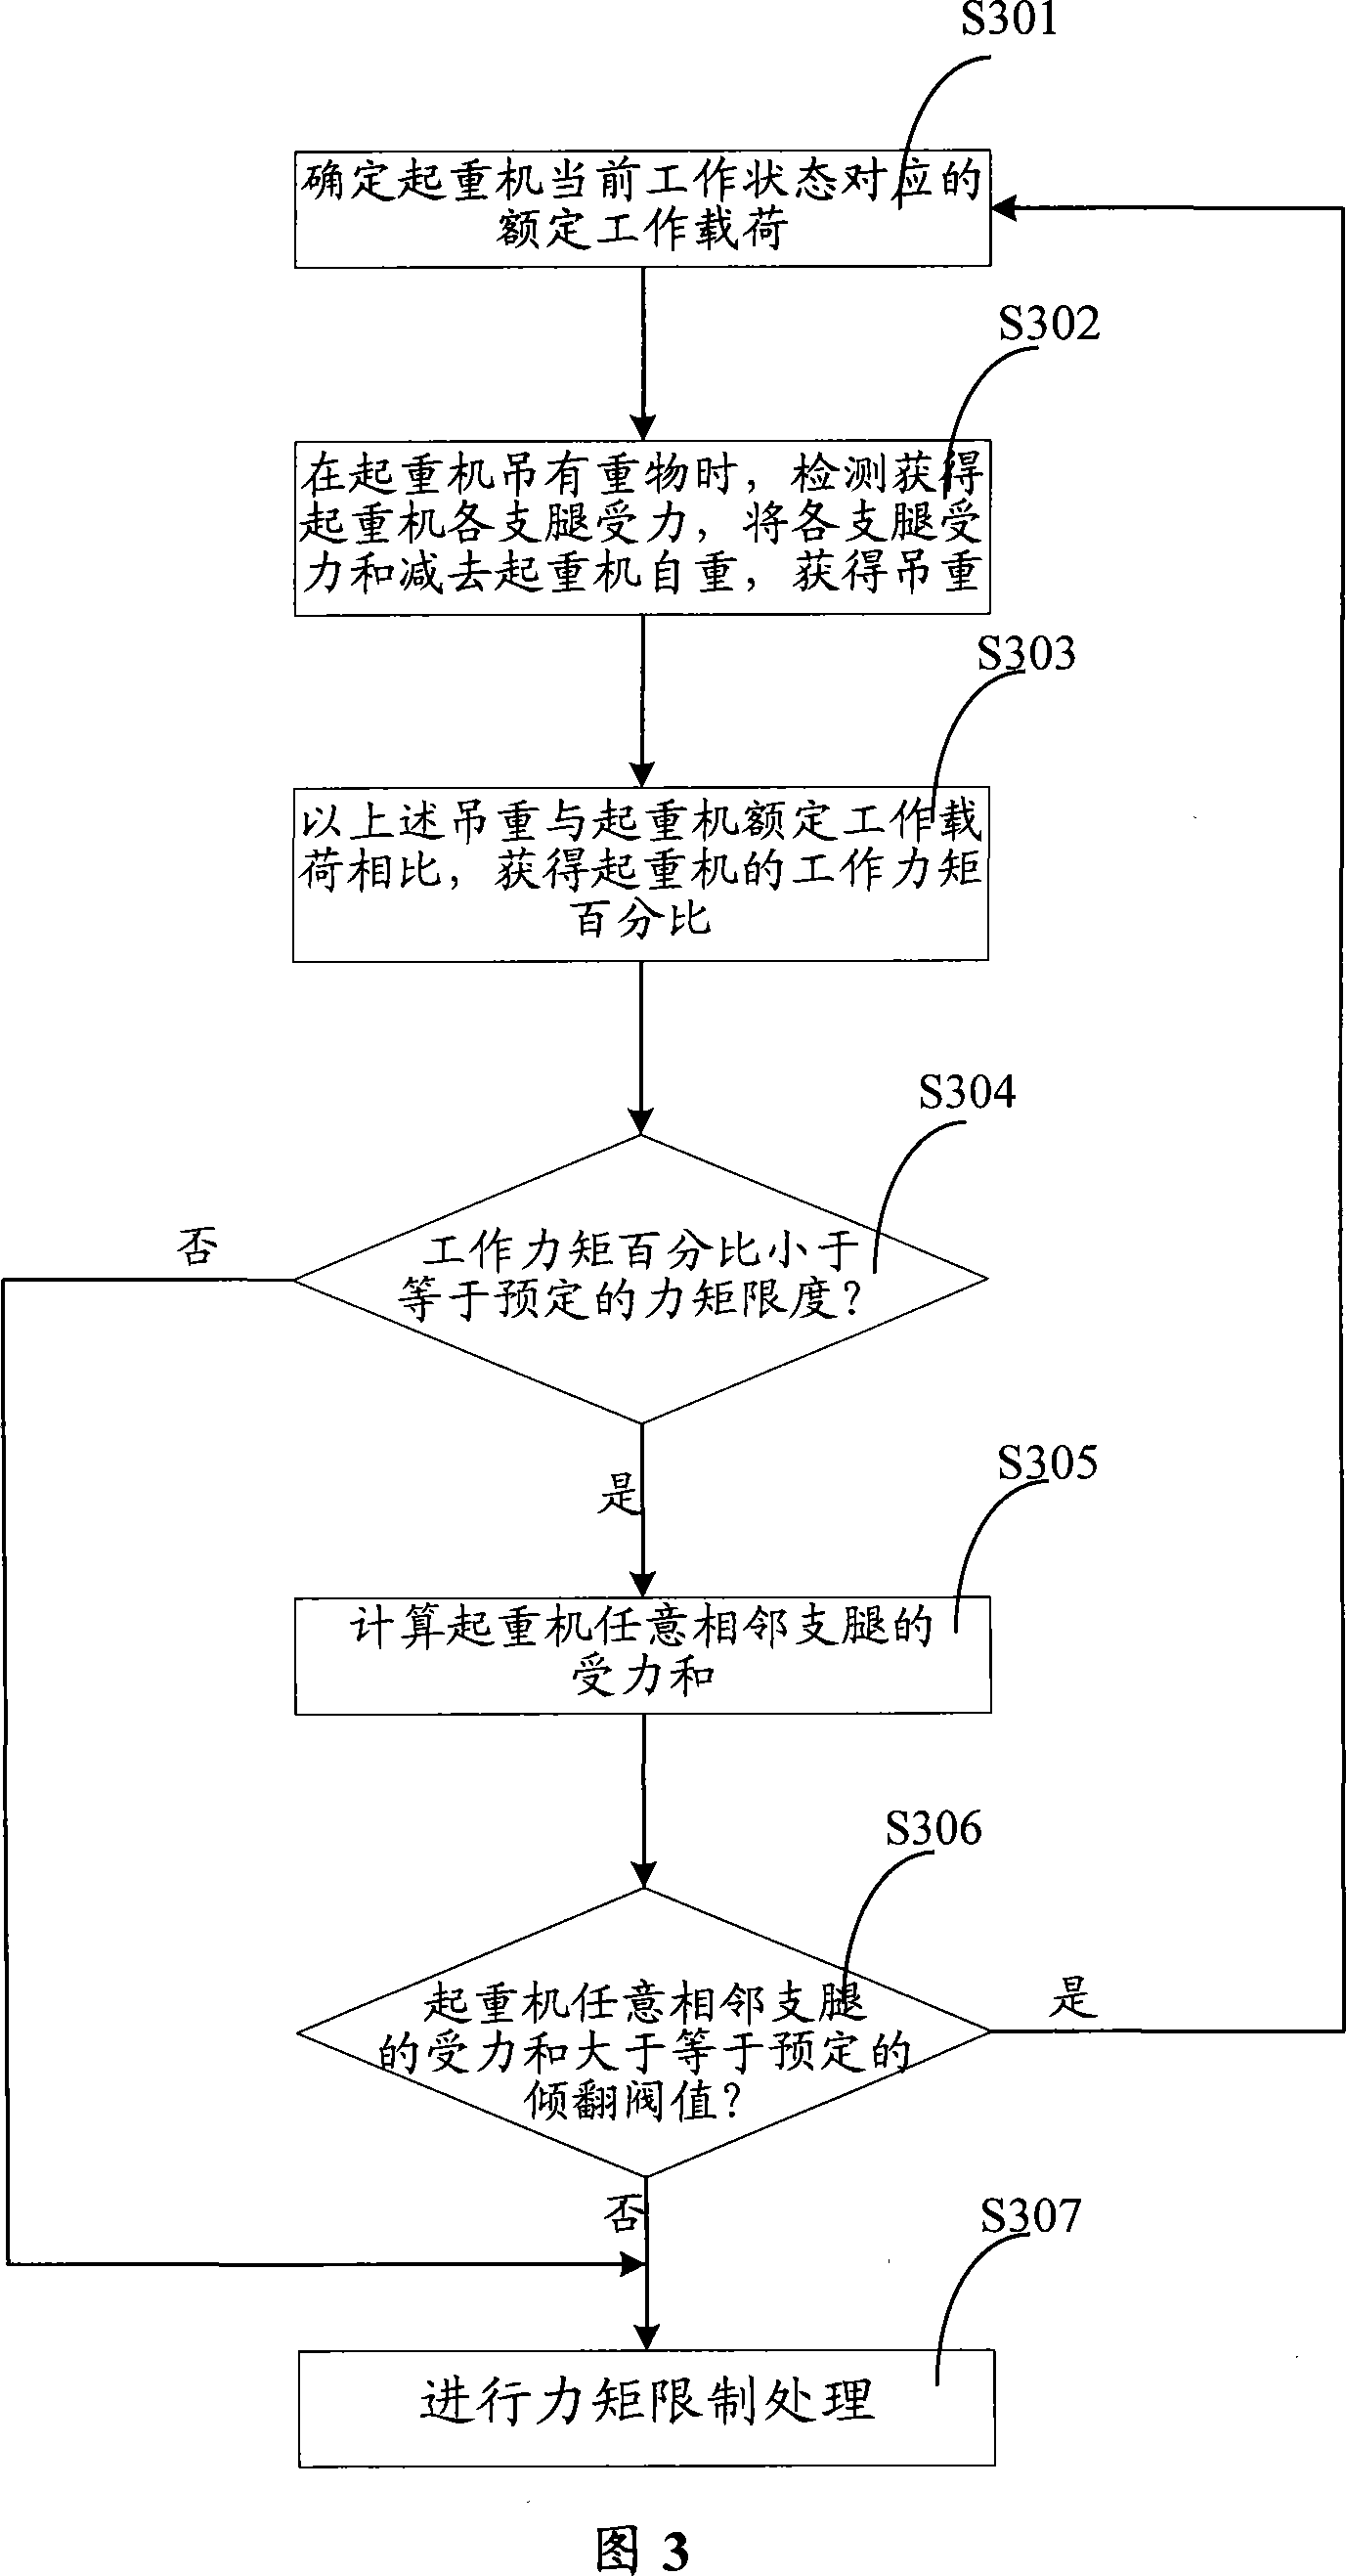 Method for measuring crane hoisting weight and counter weight and force moment controlling method and system